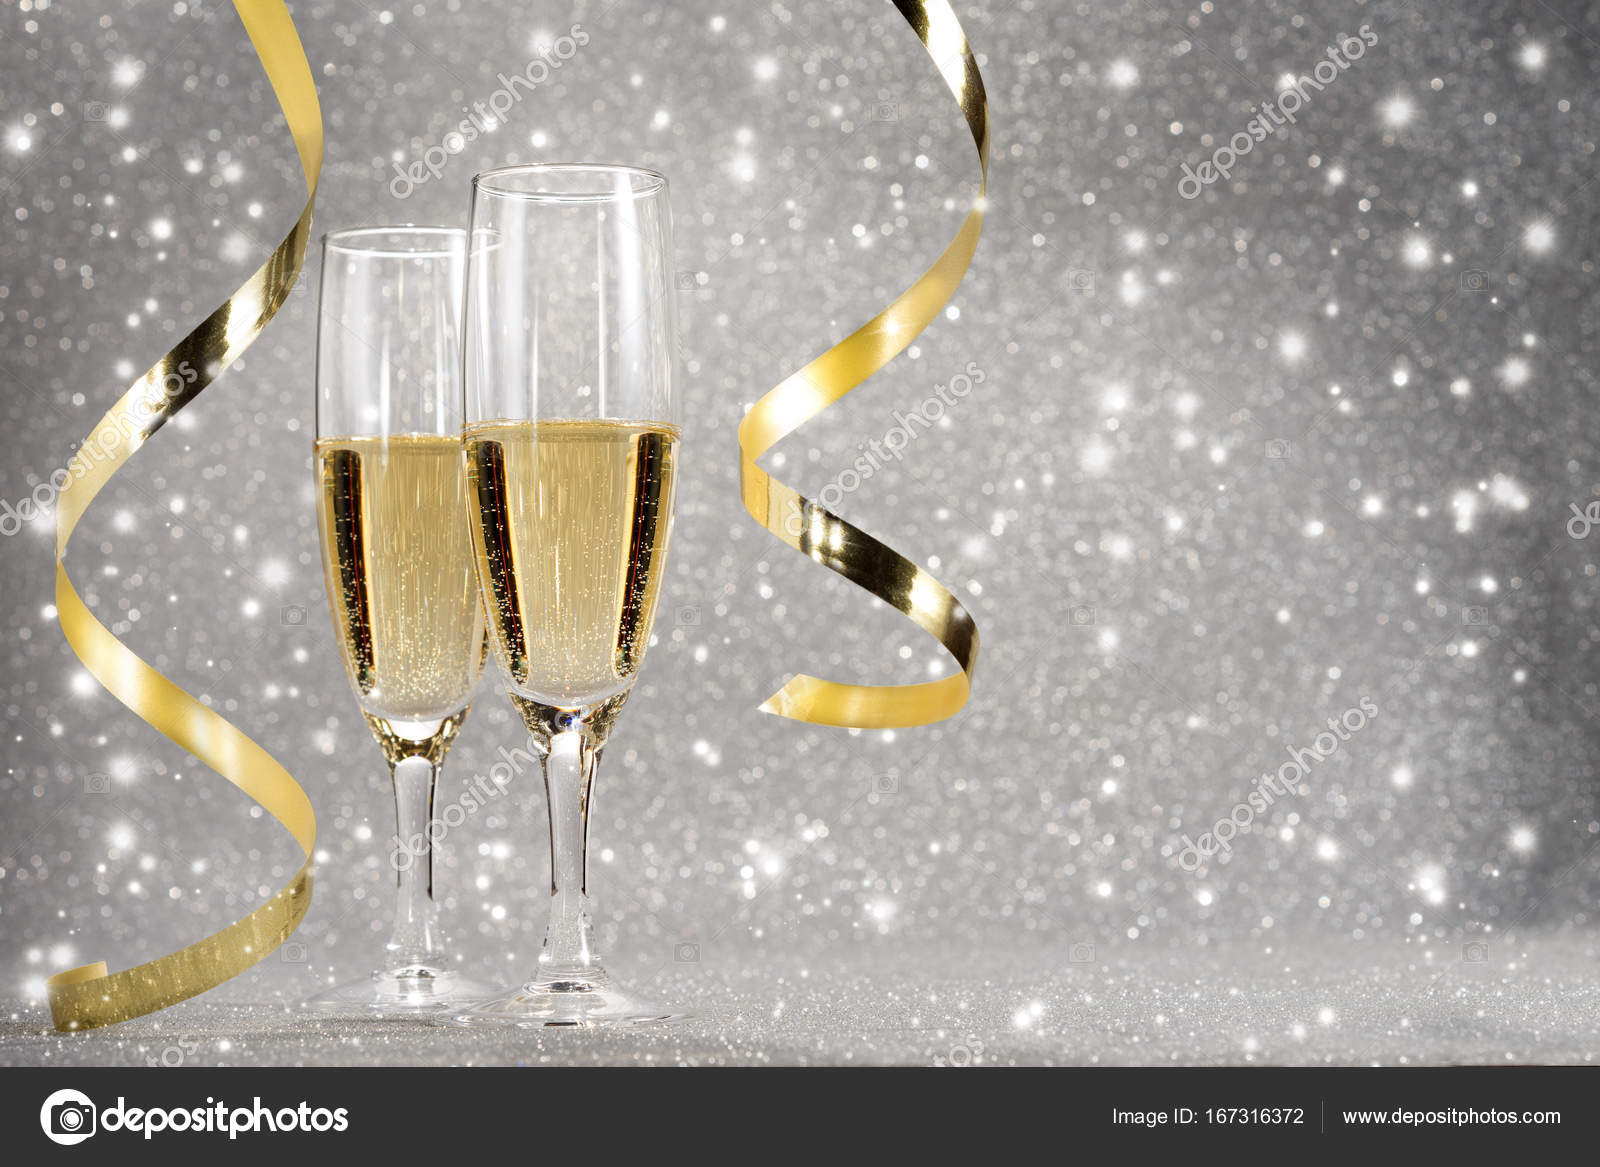 153+ Thousand Champagne Toast Royalty-Free Images, Stock Photos